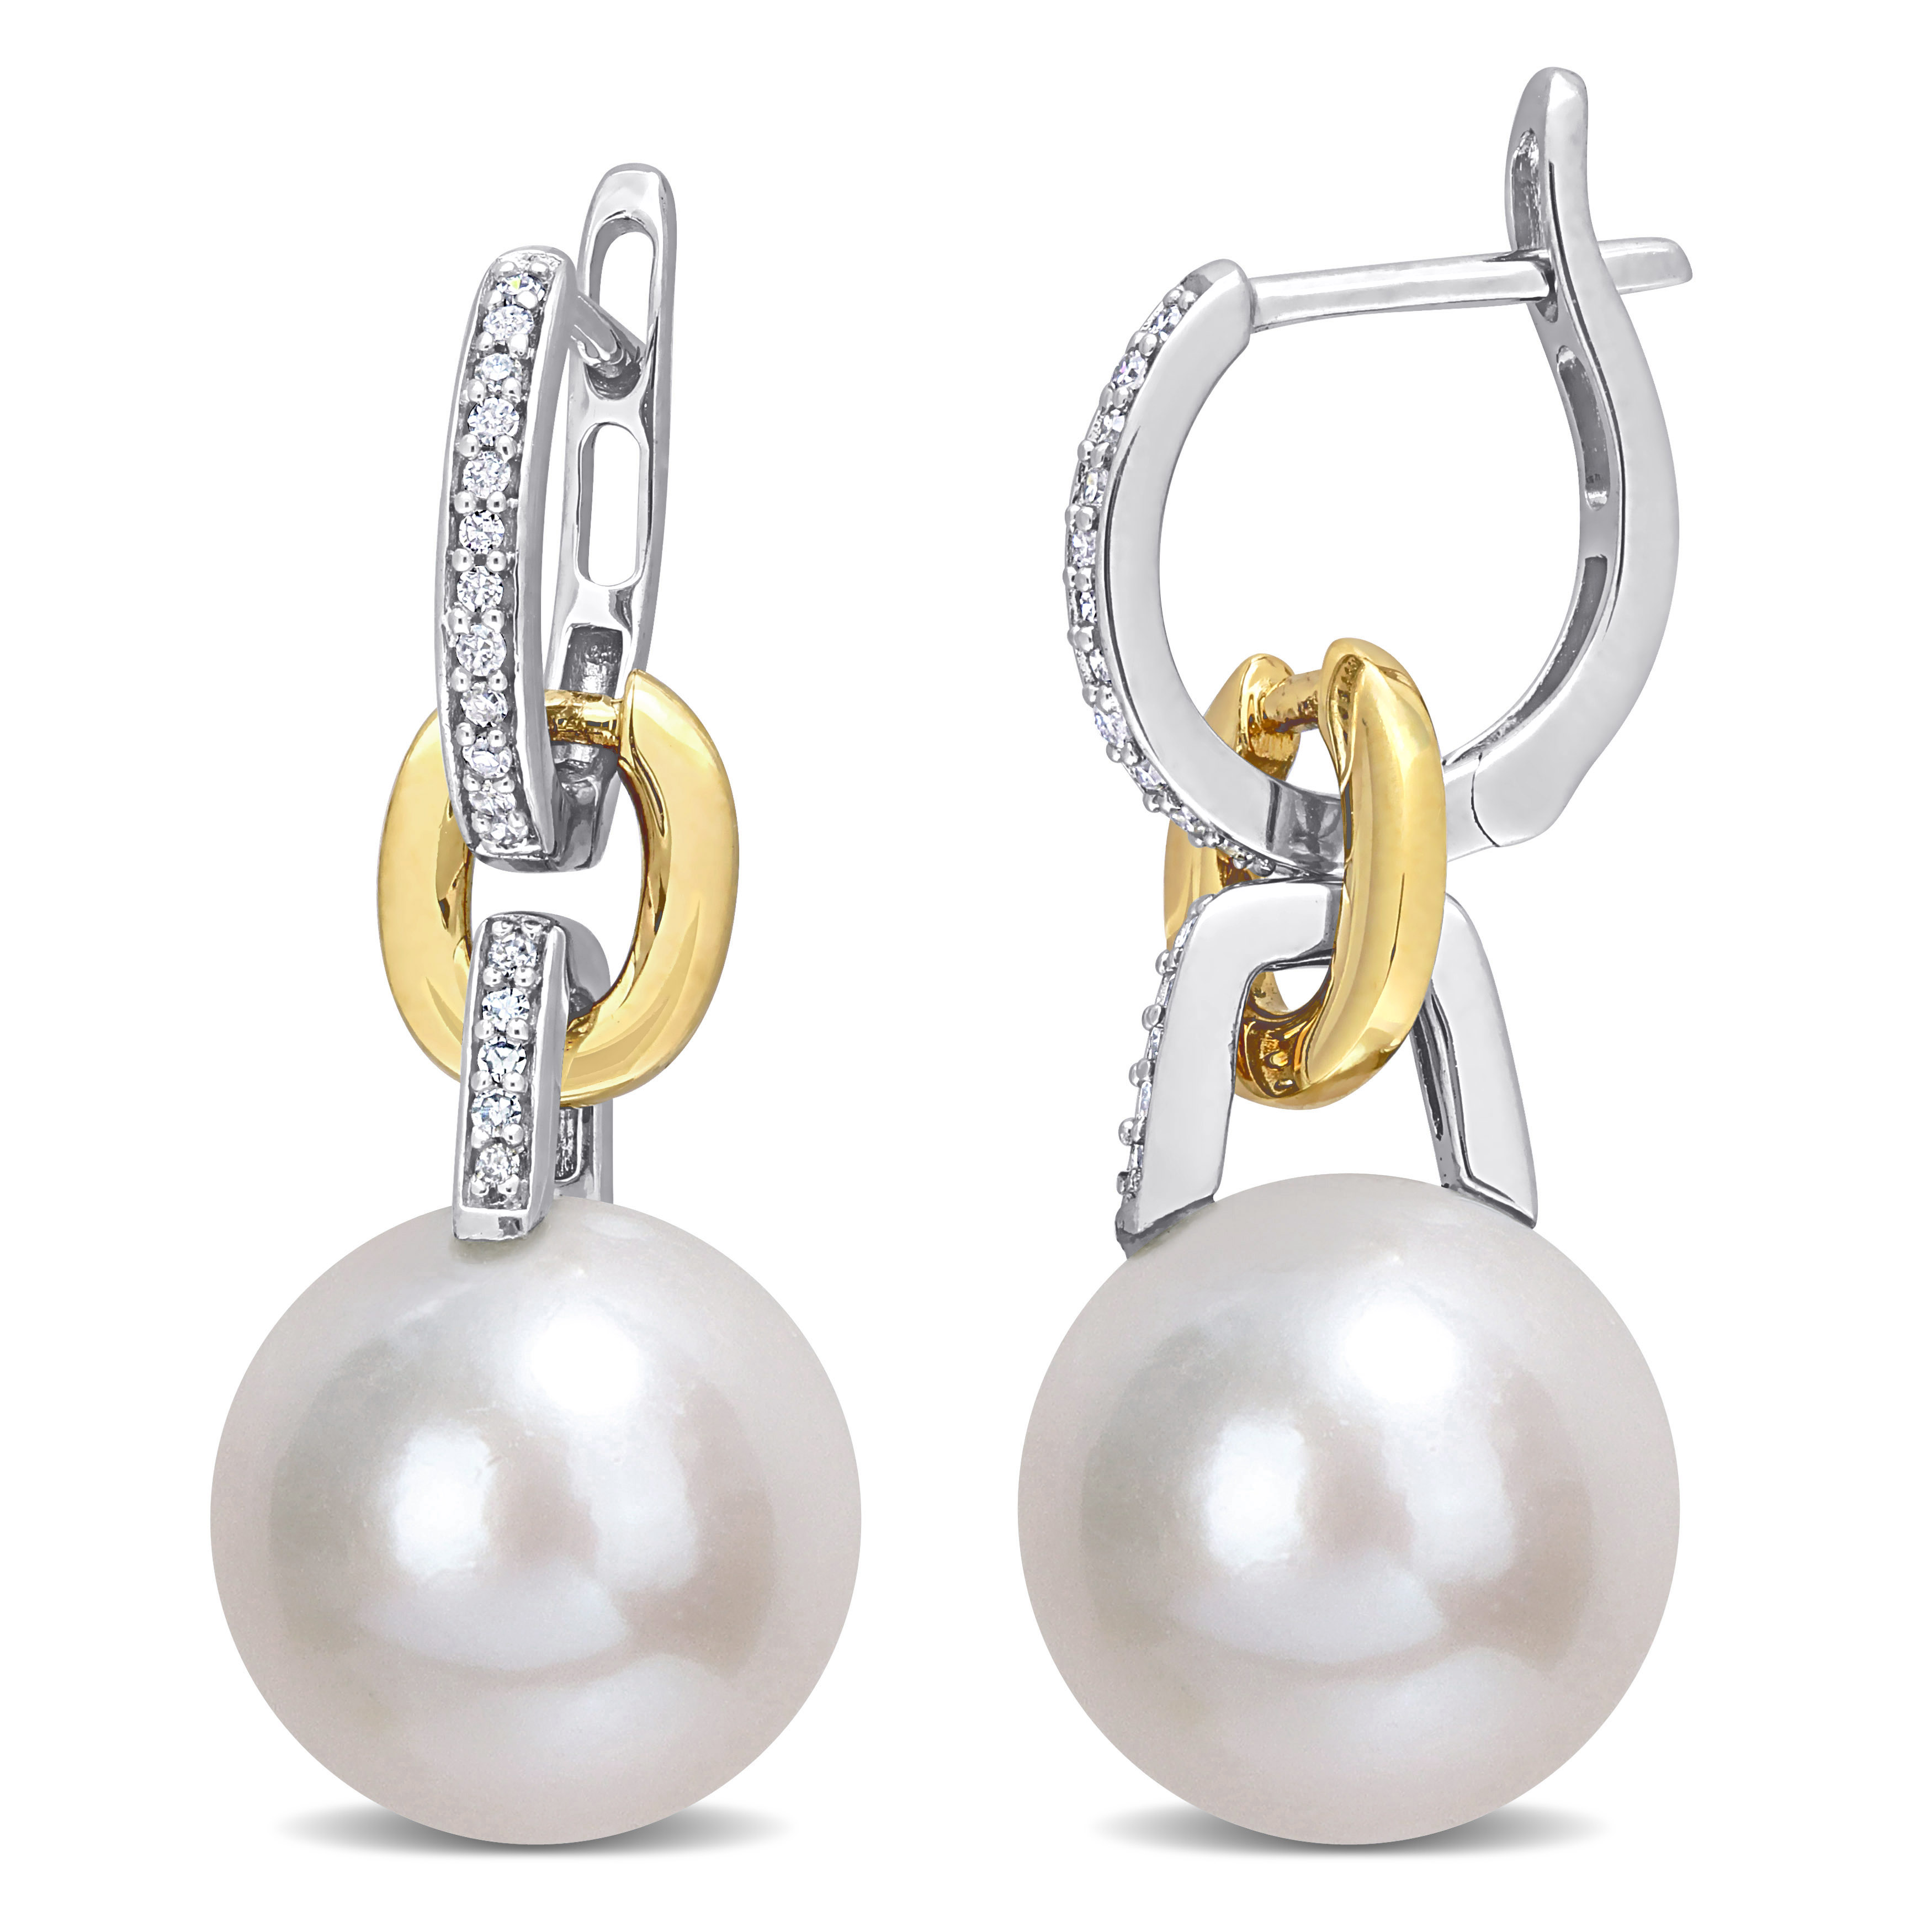 11-12 MM Freshwater Cultured Pearl & 1/10 CT TW Diamond Huggie Earrings in 2-Tone 14k Yellow and White Gold